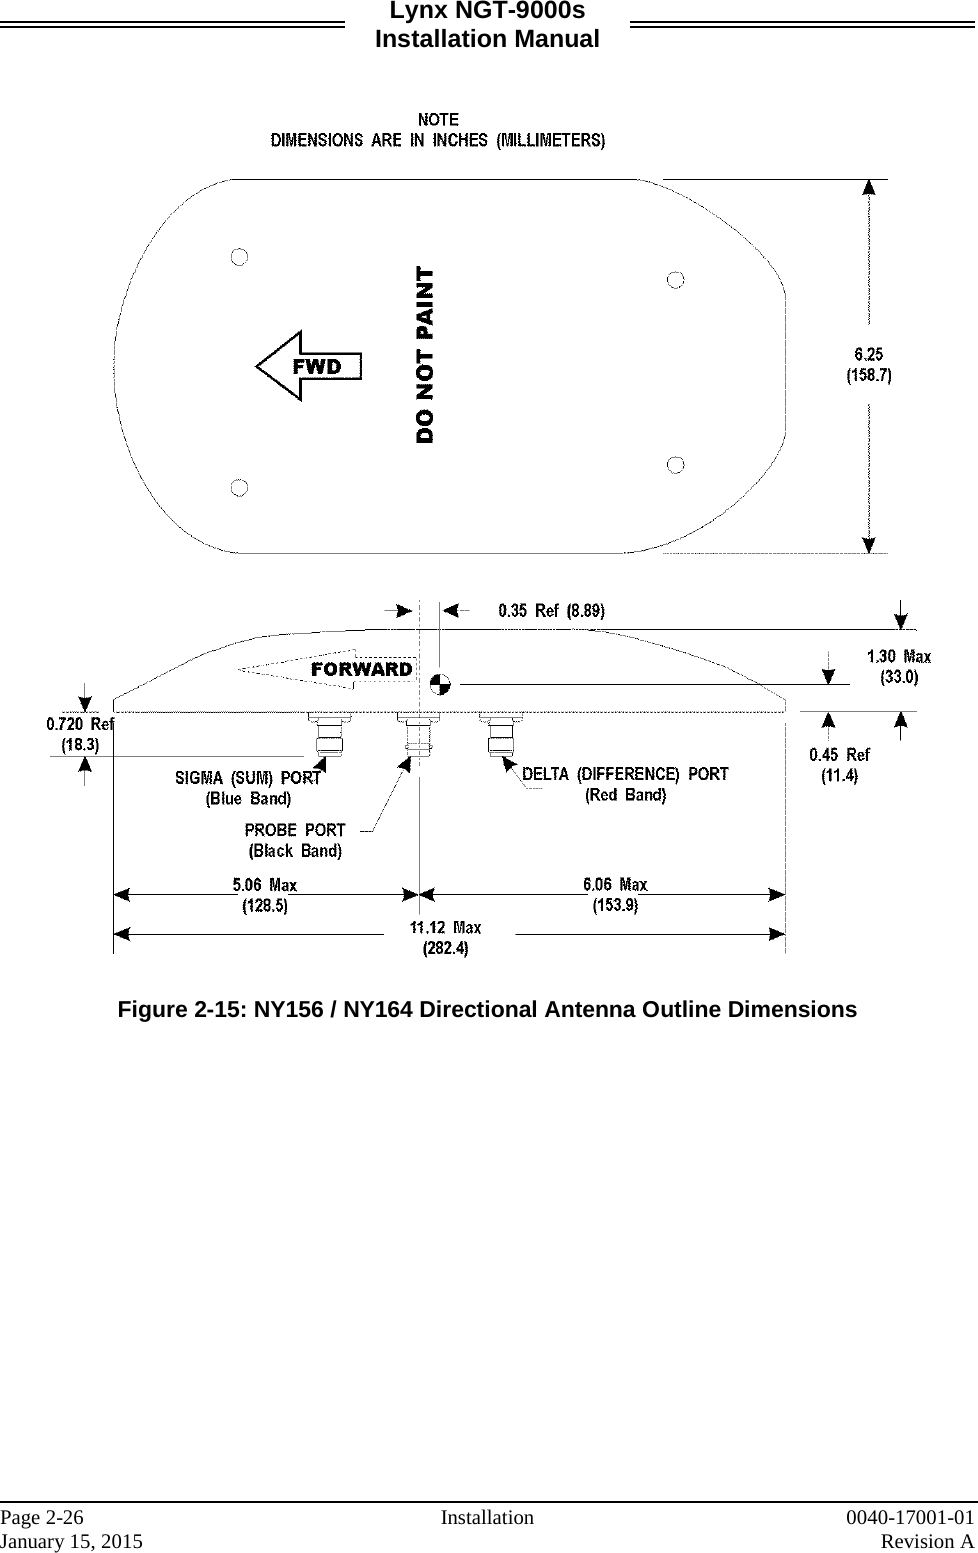 Lynx NGT-9000s Installation Manual     Figure 2-15: NY156 / NY164 Directional Antenna Outline Dimensions    Page 2-26 Installation 0040-17001-01 January 15, 2015    Revision A  